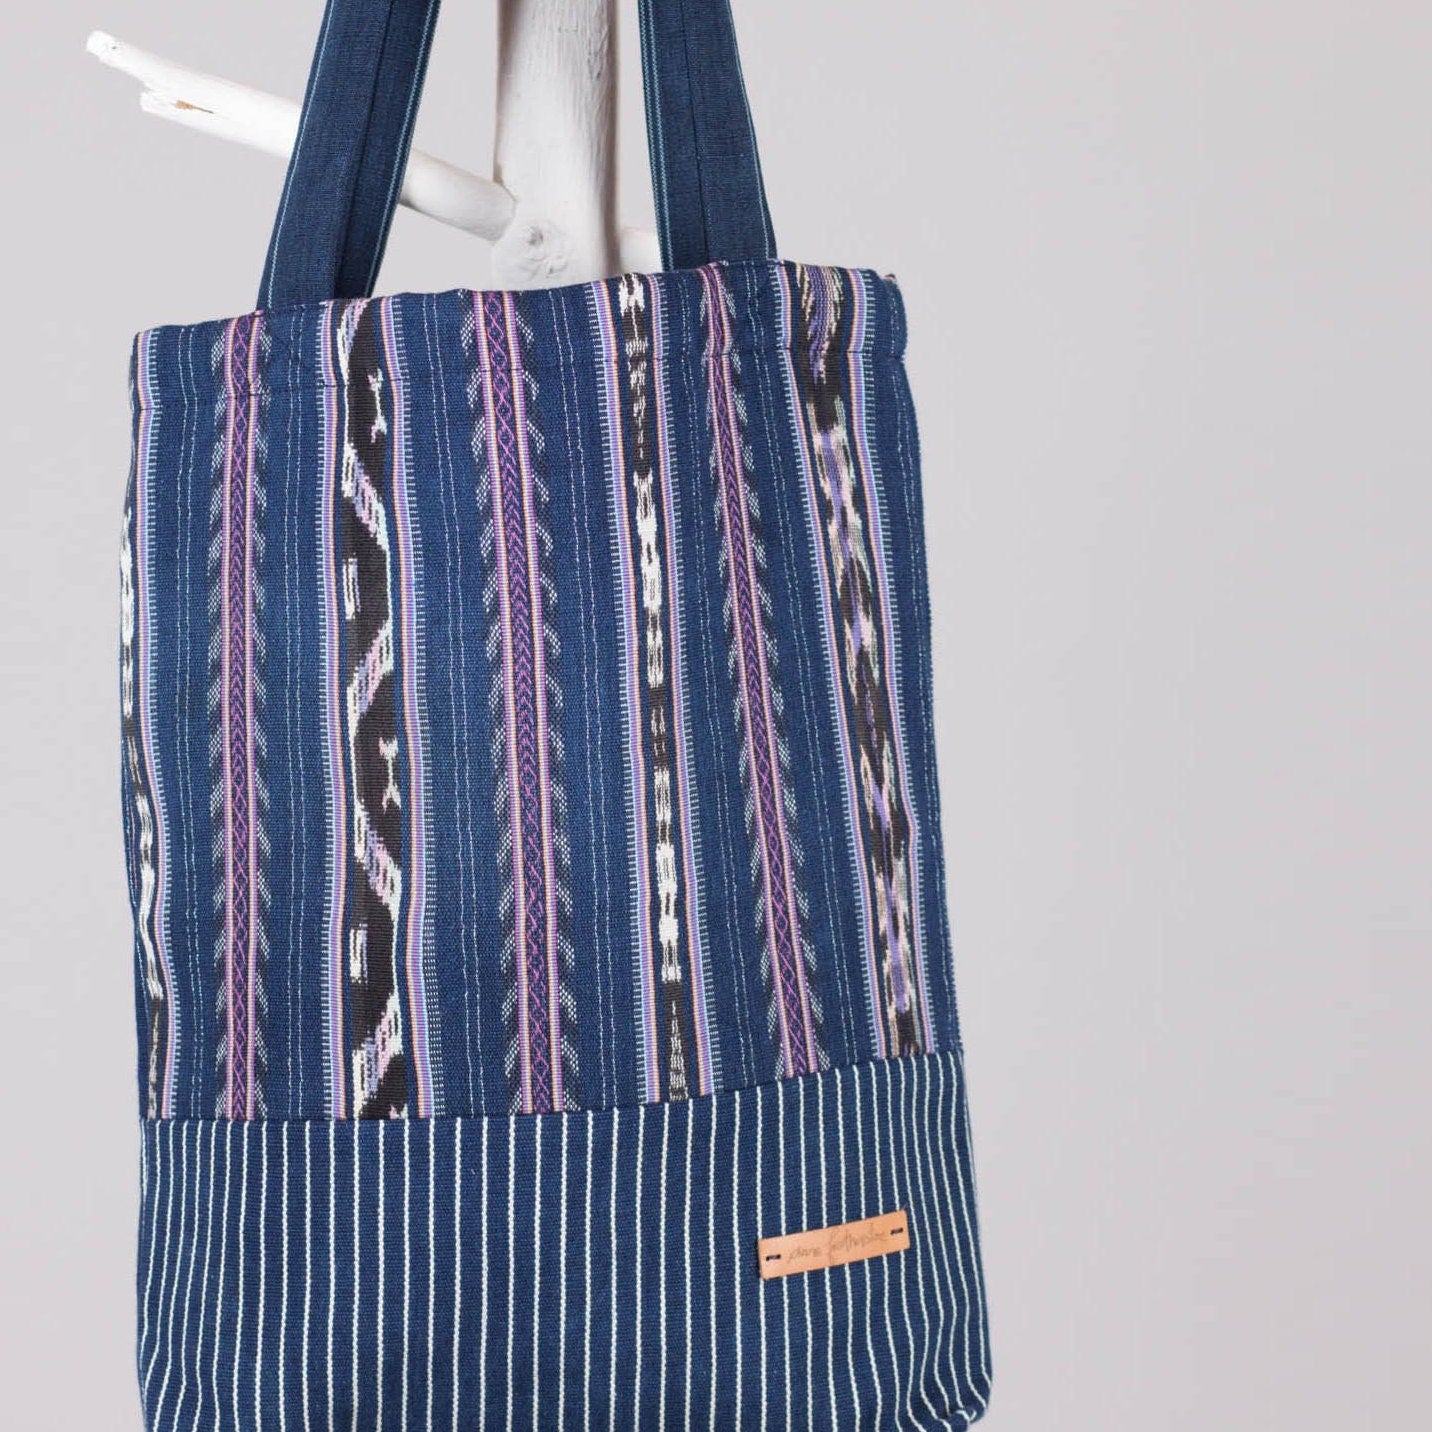 Stable hand-woven bag with inner pocket No.01, UNIKAT, lined, canvas, cotton, jute bag, fabric bag